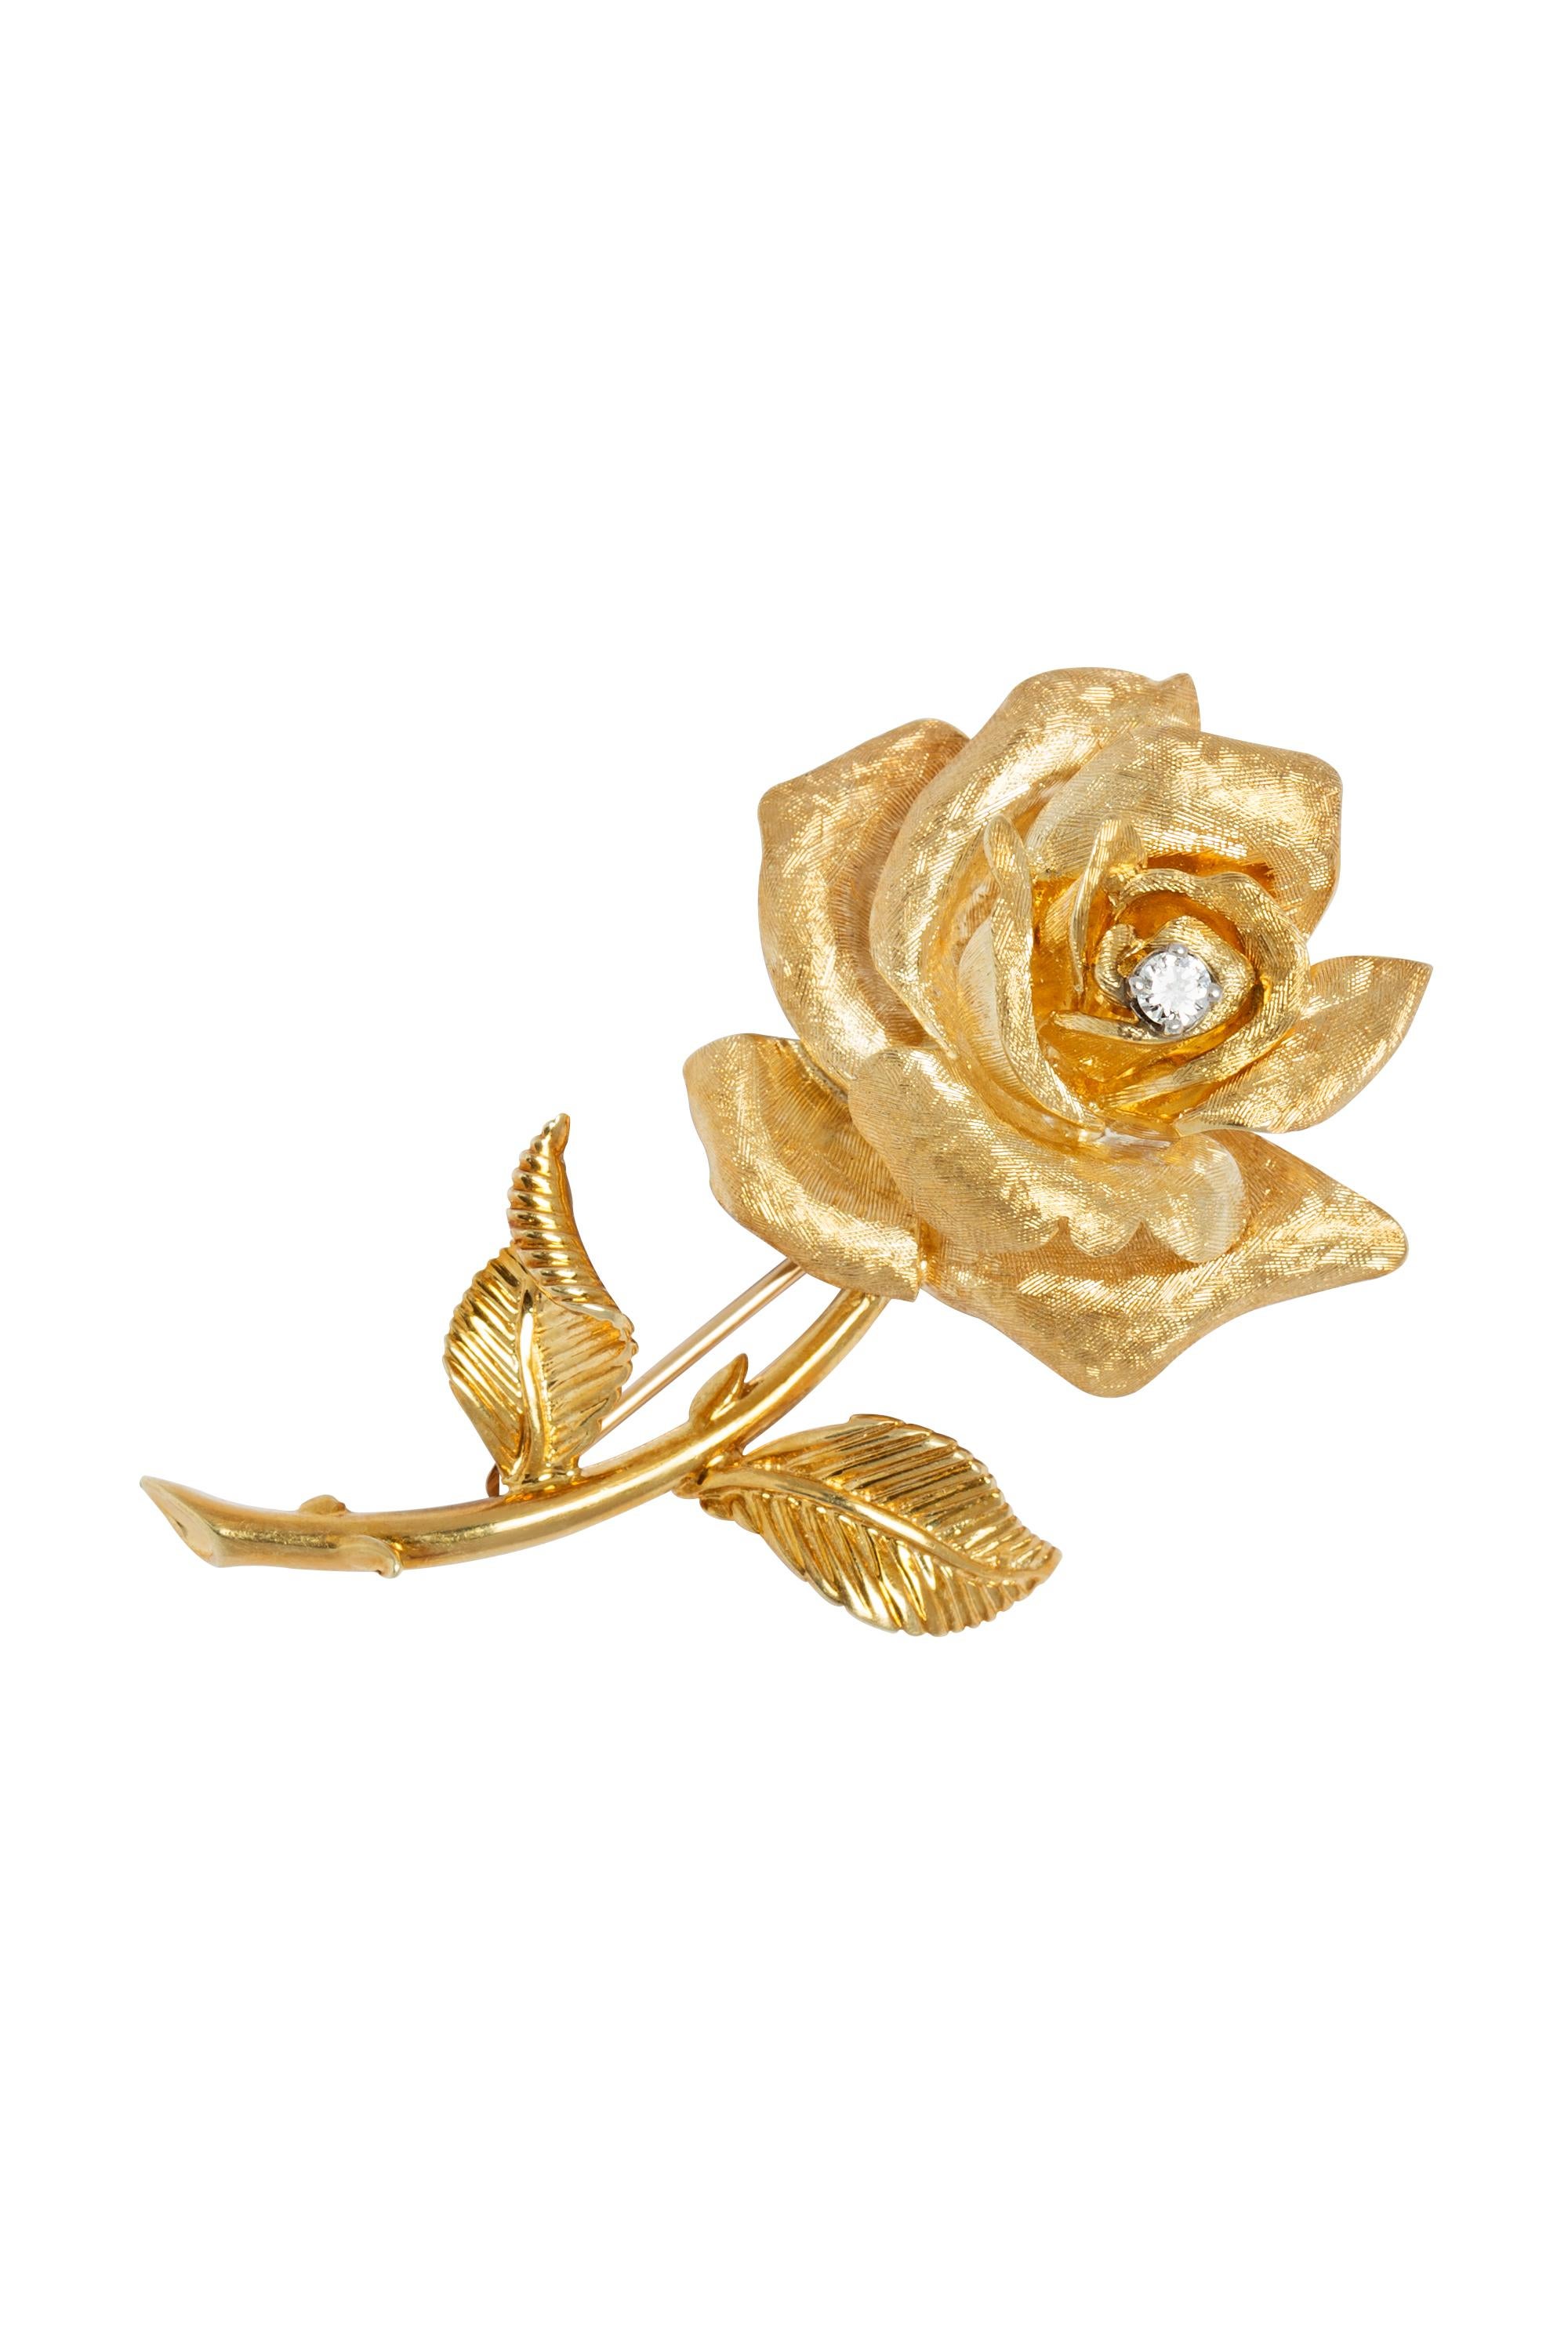 The perfect rose. This beautifully rendered brooch features a softly shimmering textured and sculpted rose atop a stem of ribbed gold leaves. At the heart of the rose is a sparkling round brilliant diamond weighing approximately 0.15 carats. The